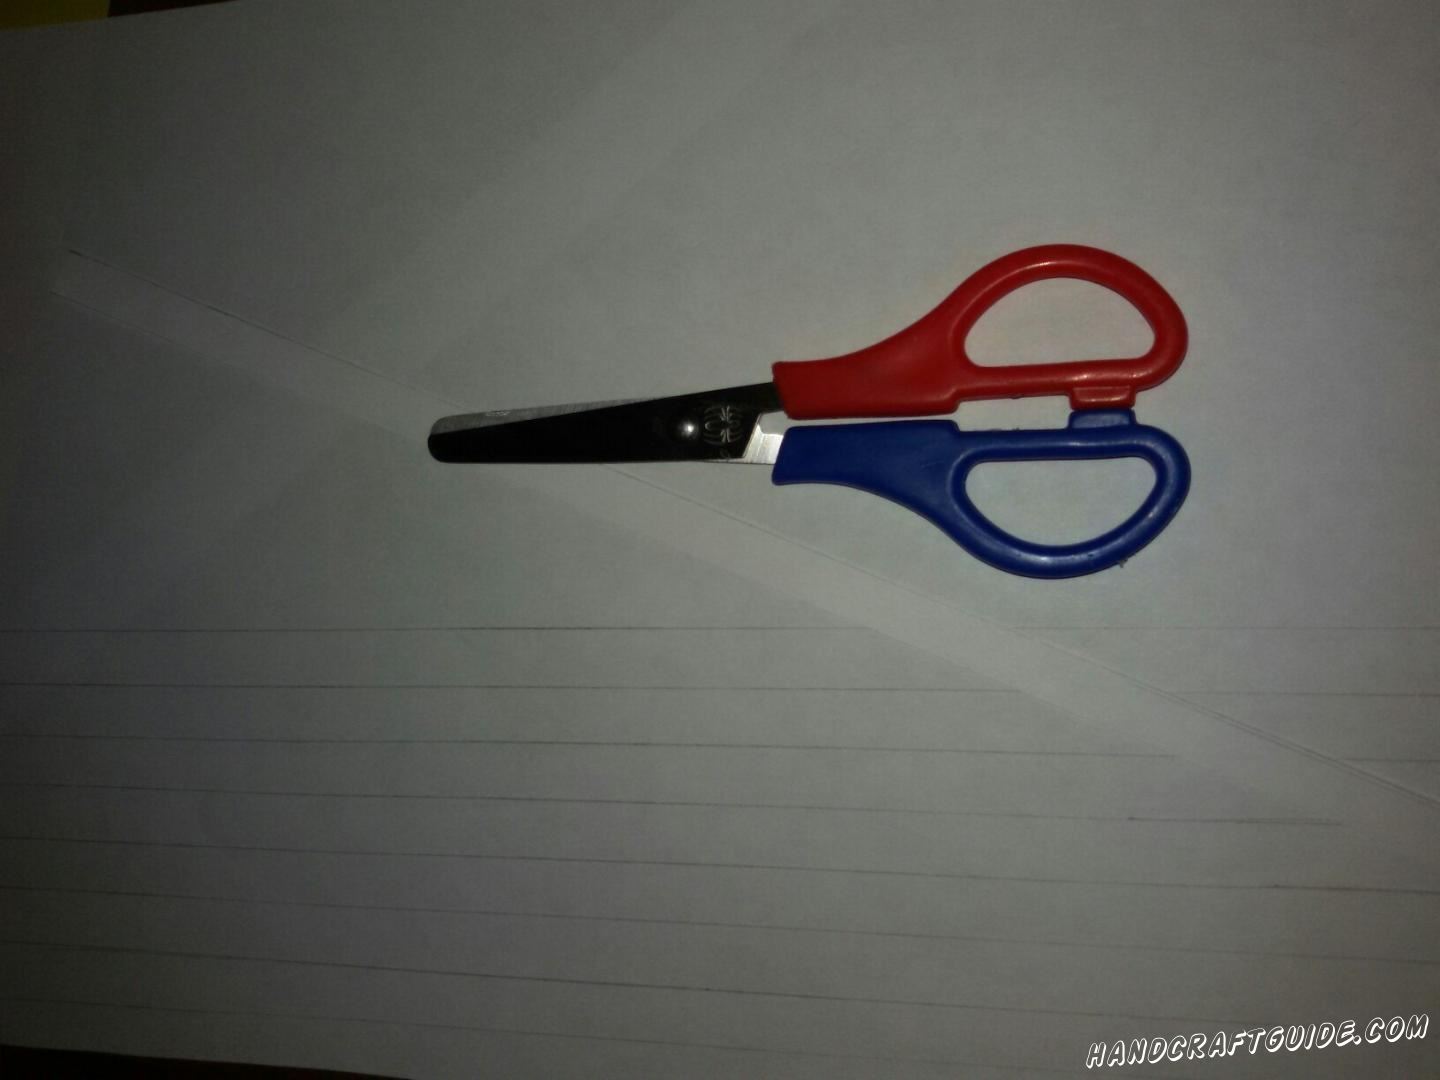 To draw on the white paper straight lines and cut them